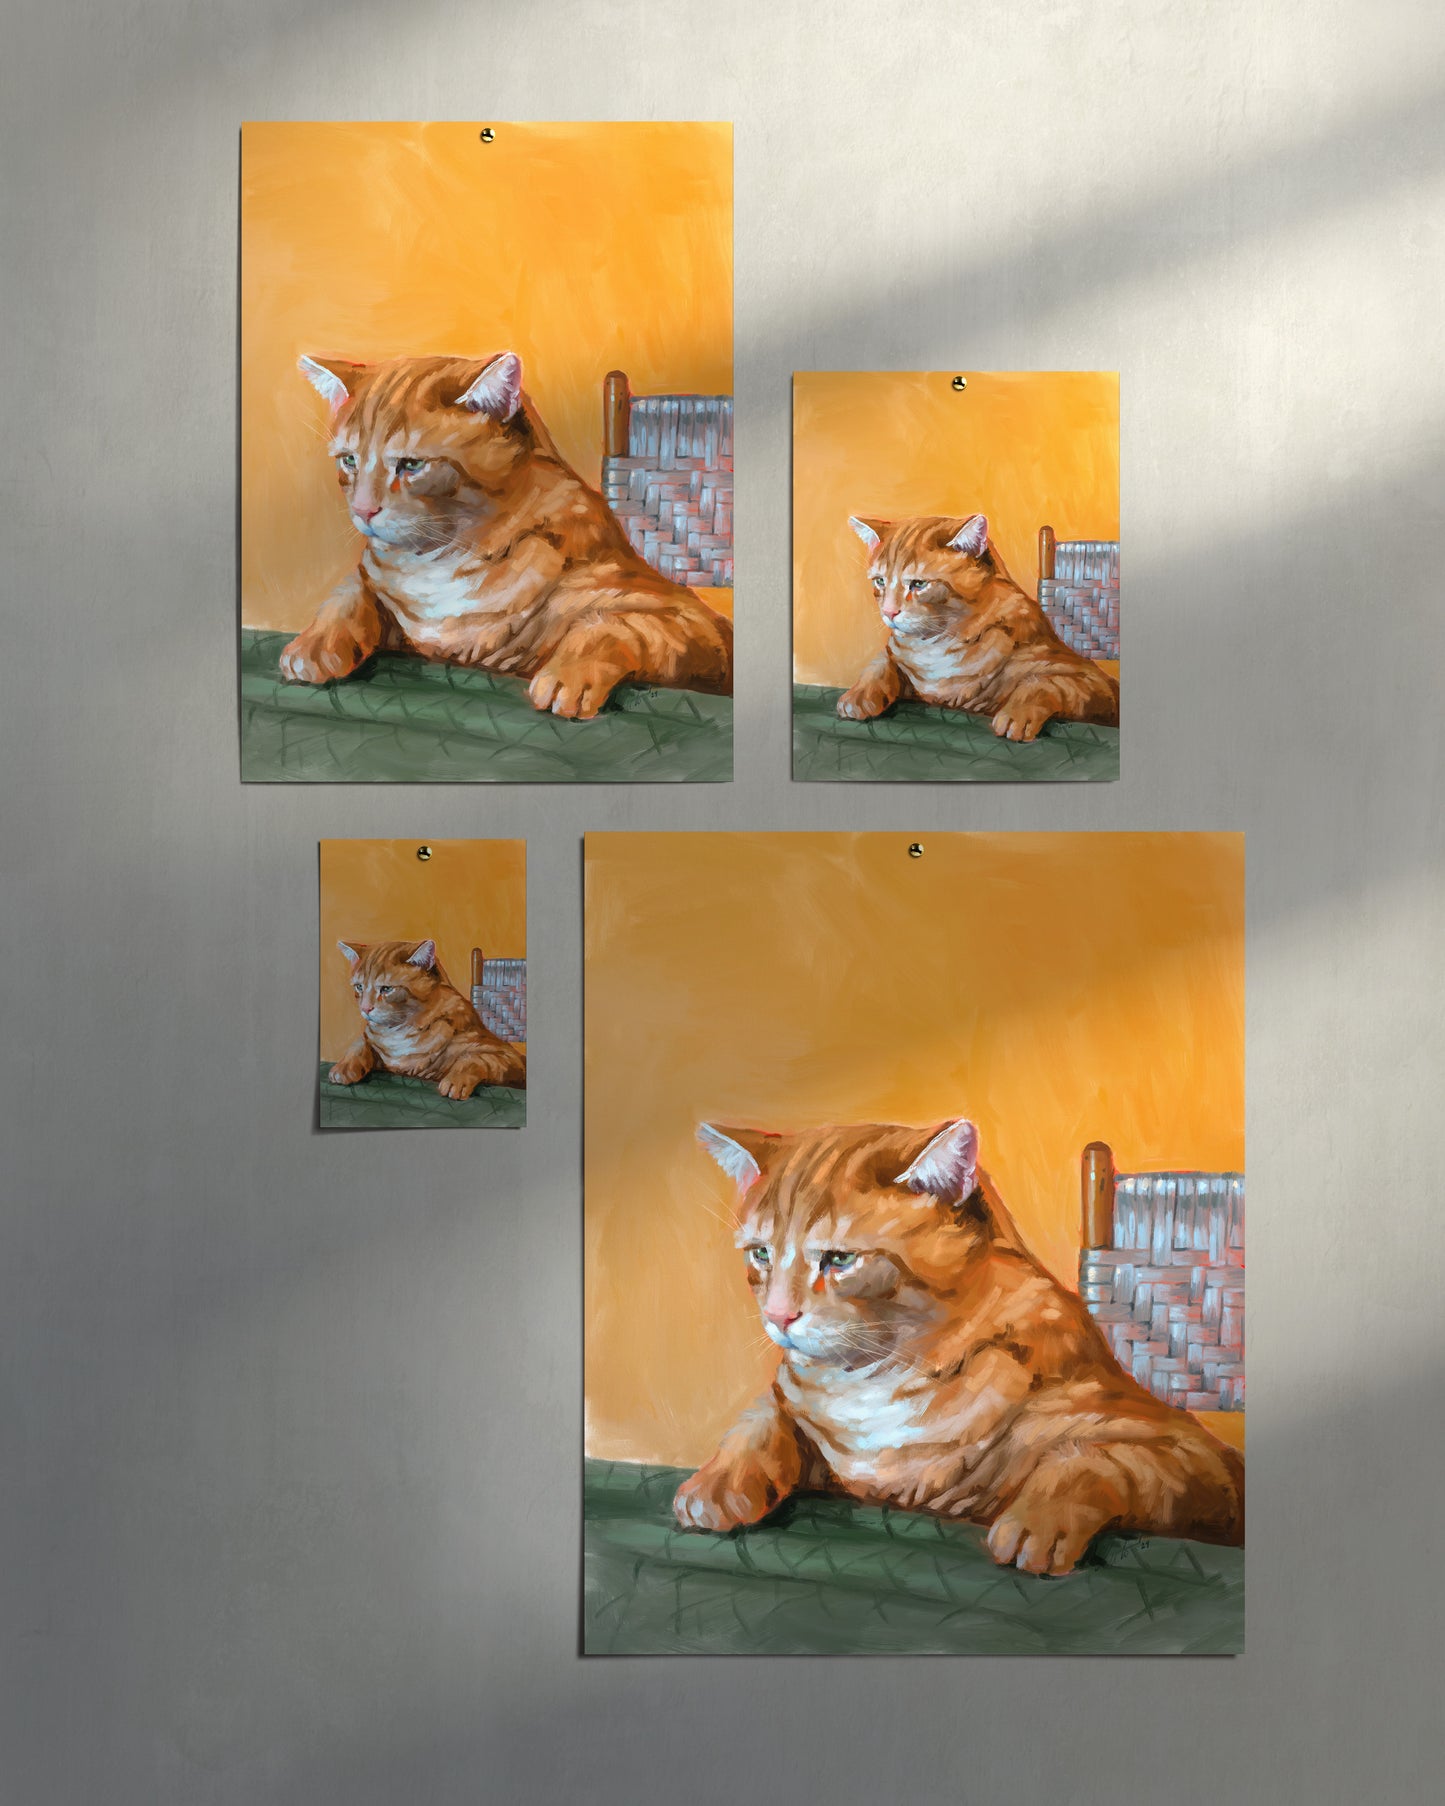 "Patapon" by Catherine Hébert - Orange Tabby Cat At The Dinner Table Art Print